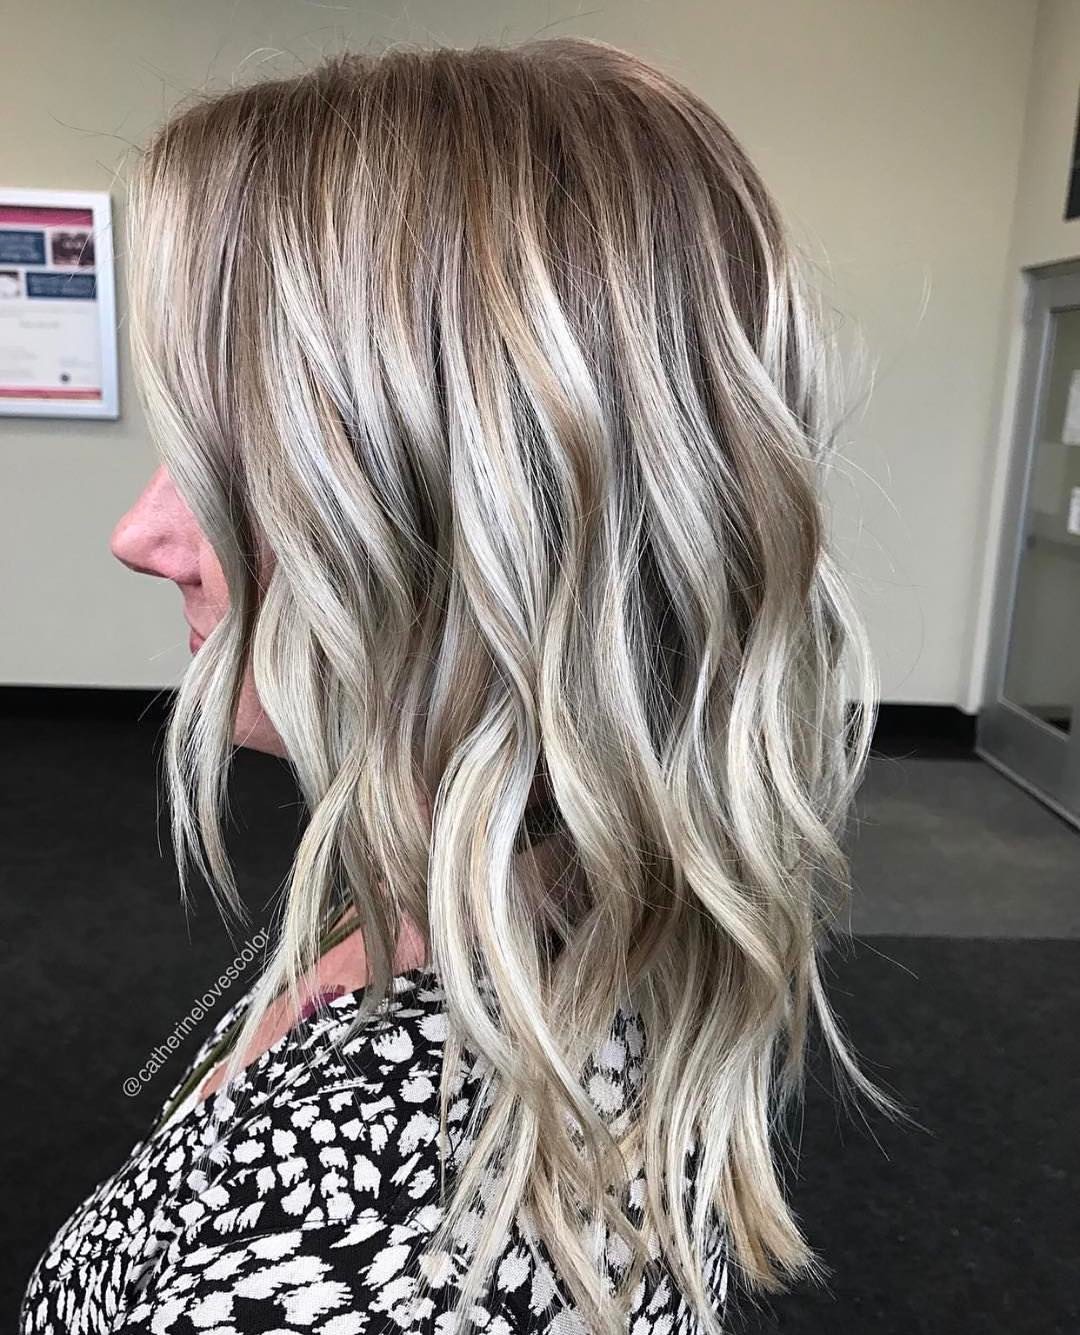 25 Cool Stylish Ash Blonde Hair Color Ideas for Short ...